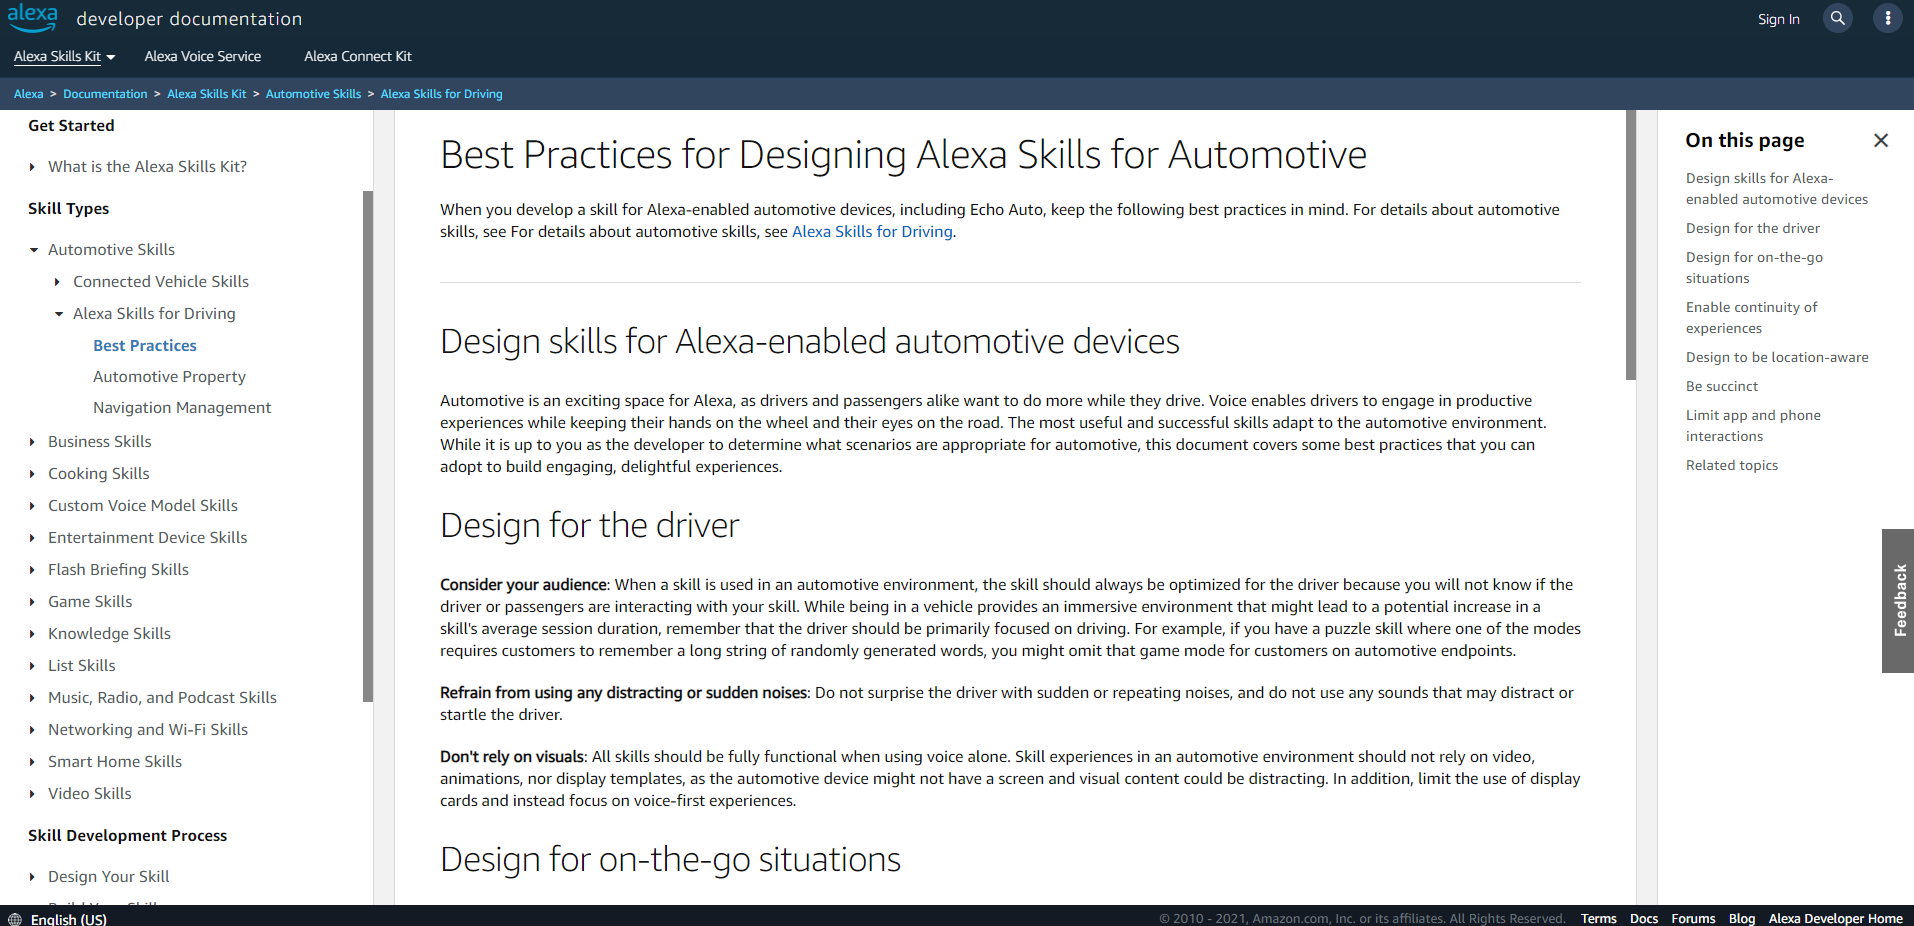 Best Practices for Designing Alexa Skills for Automotive - Technical Documentation